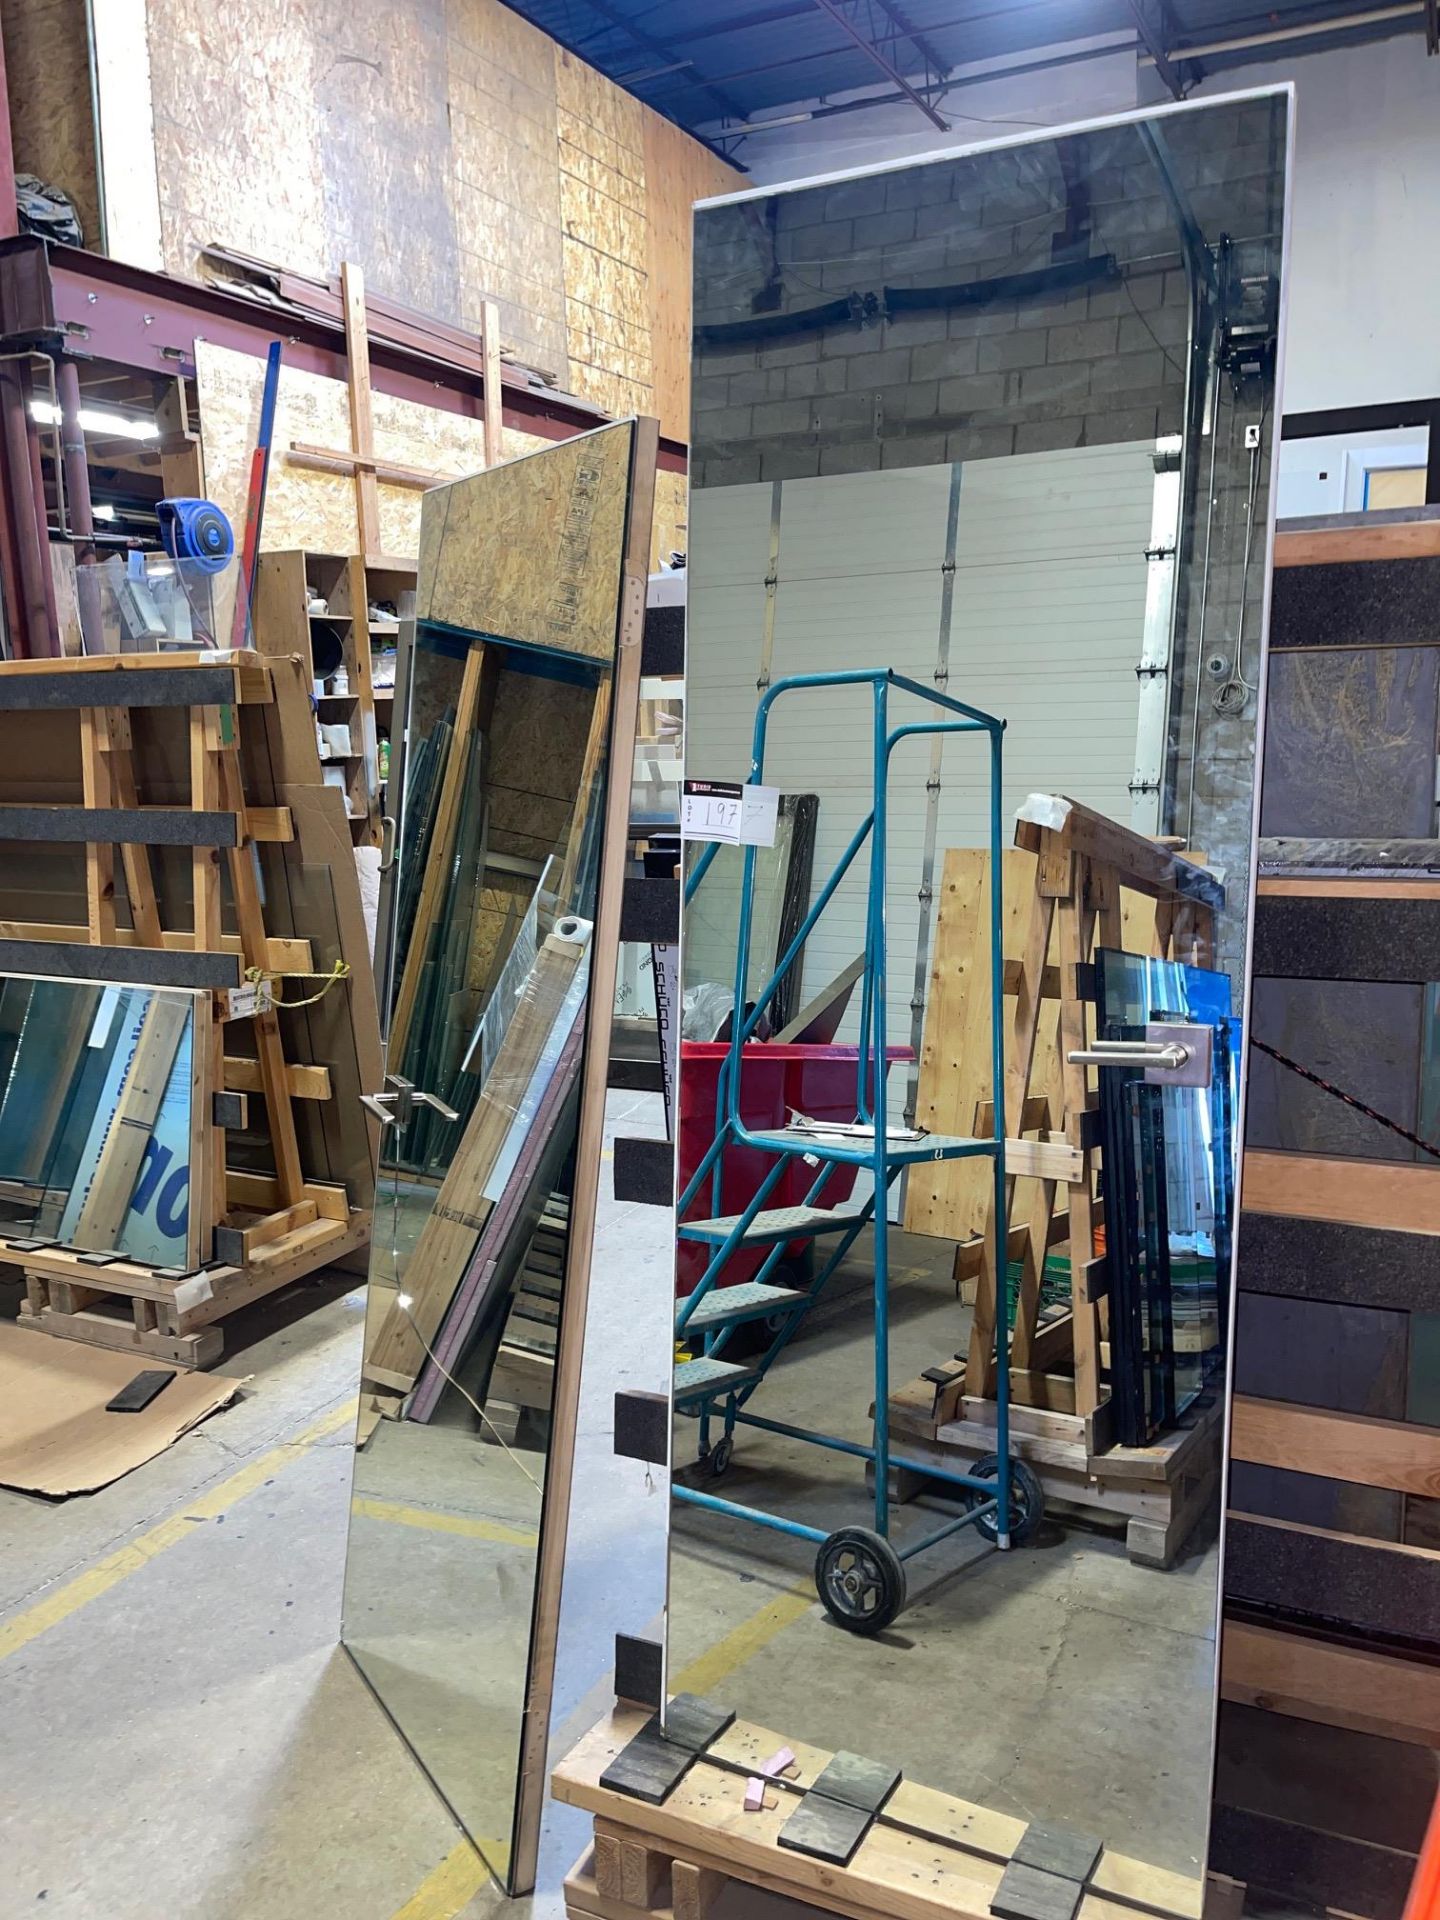 LOT/56” X 79”, SOLUD DOORS WITH MIRROR, RIGGING $25 - Image 3 of 5